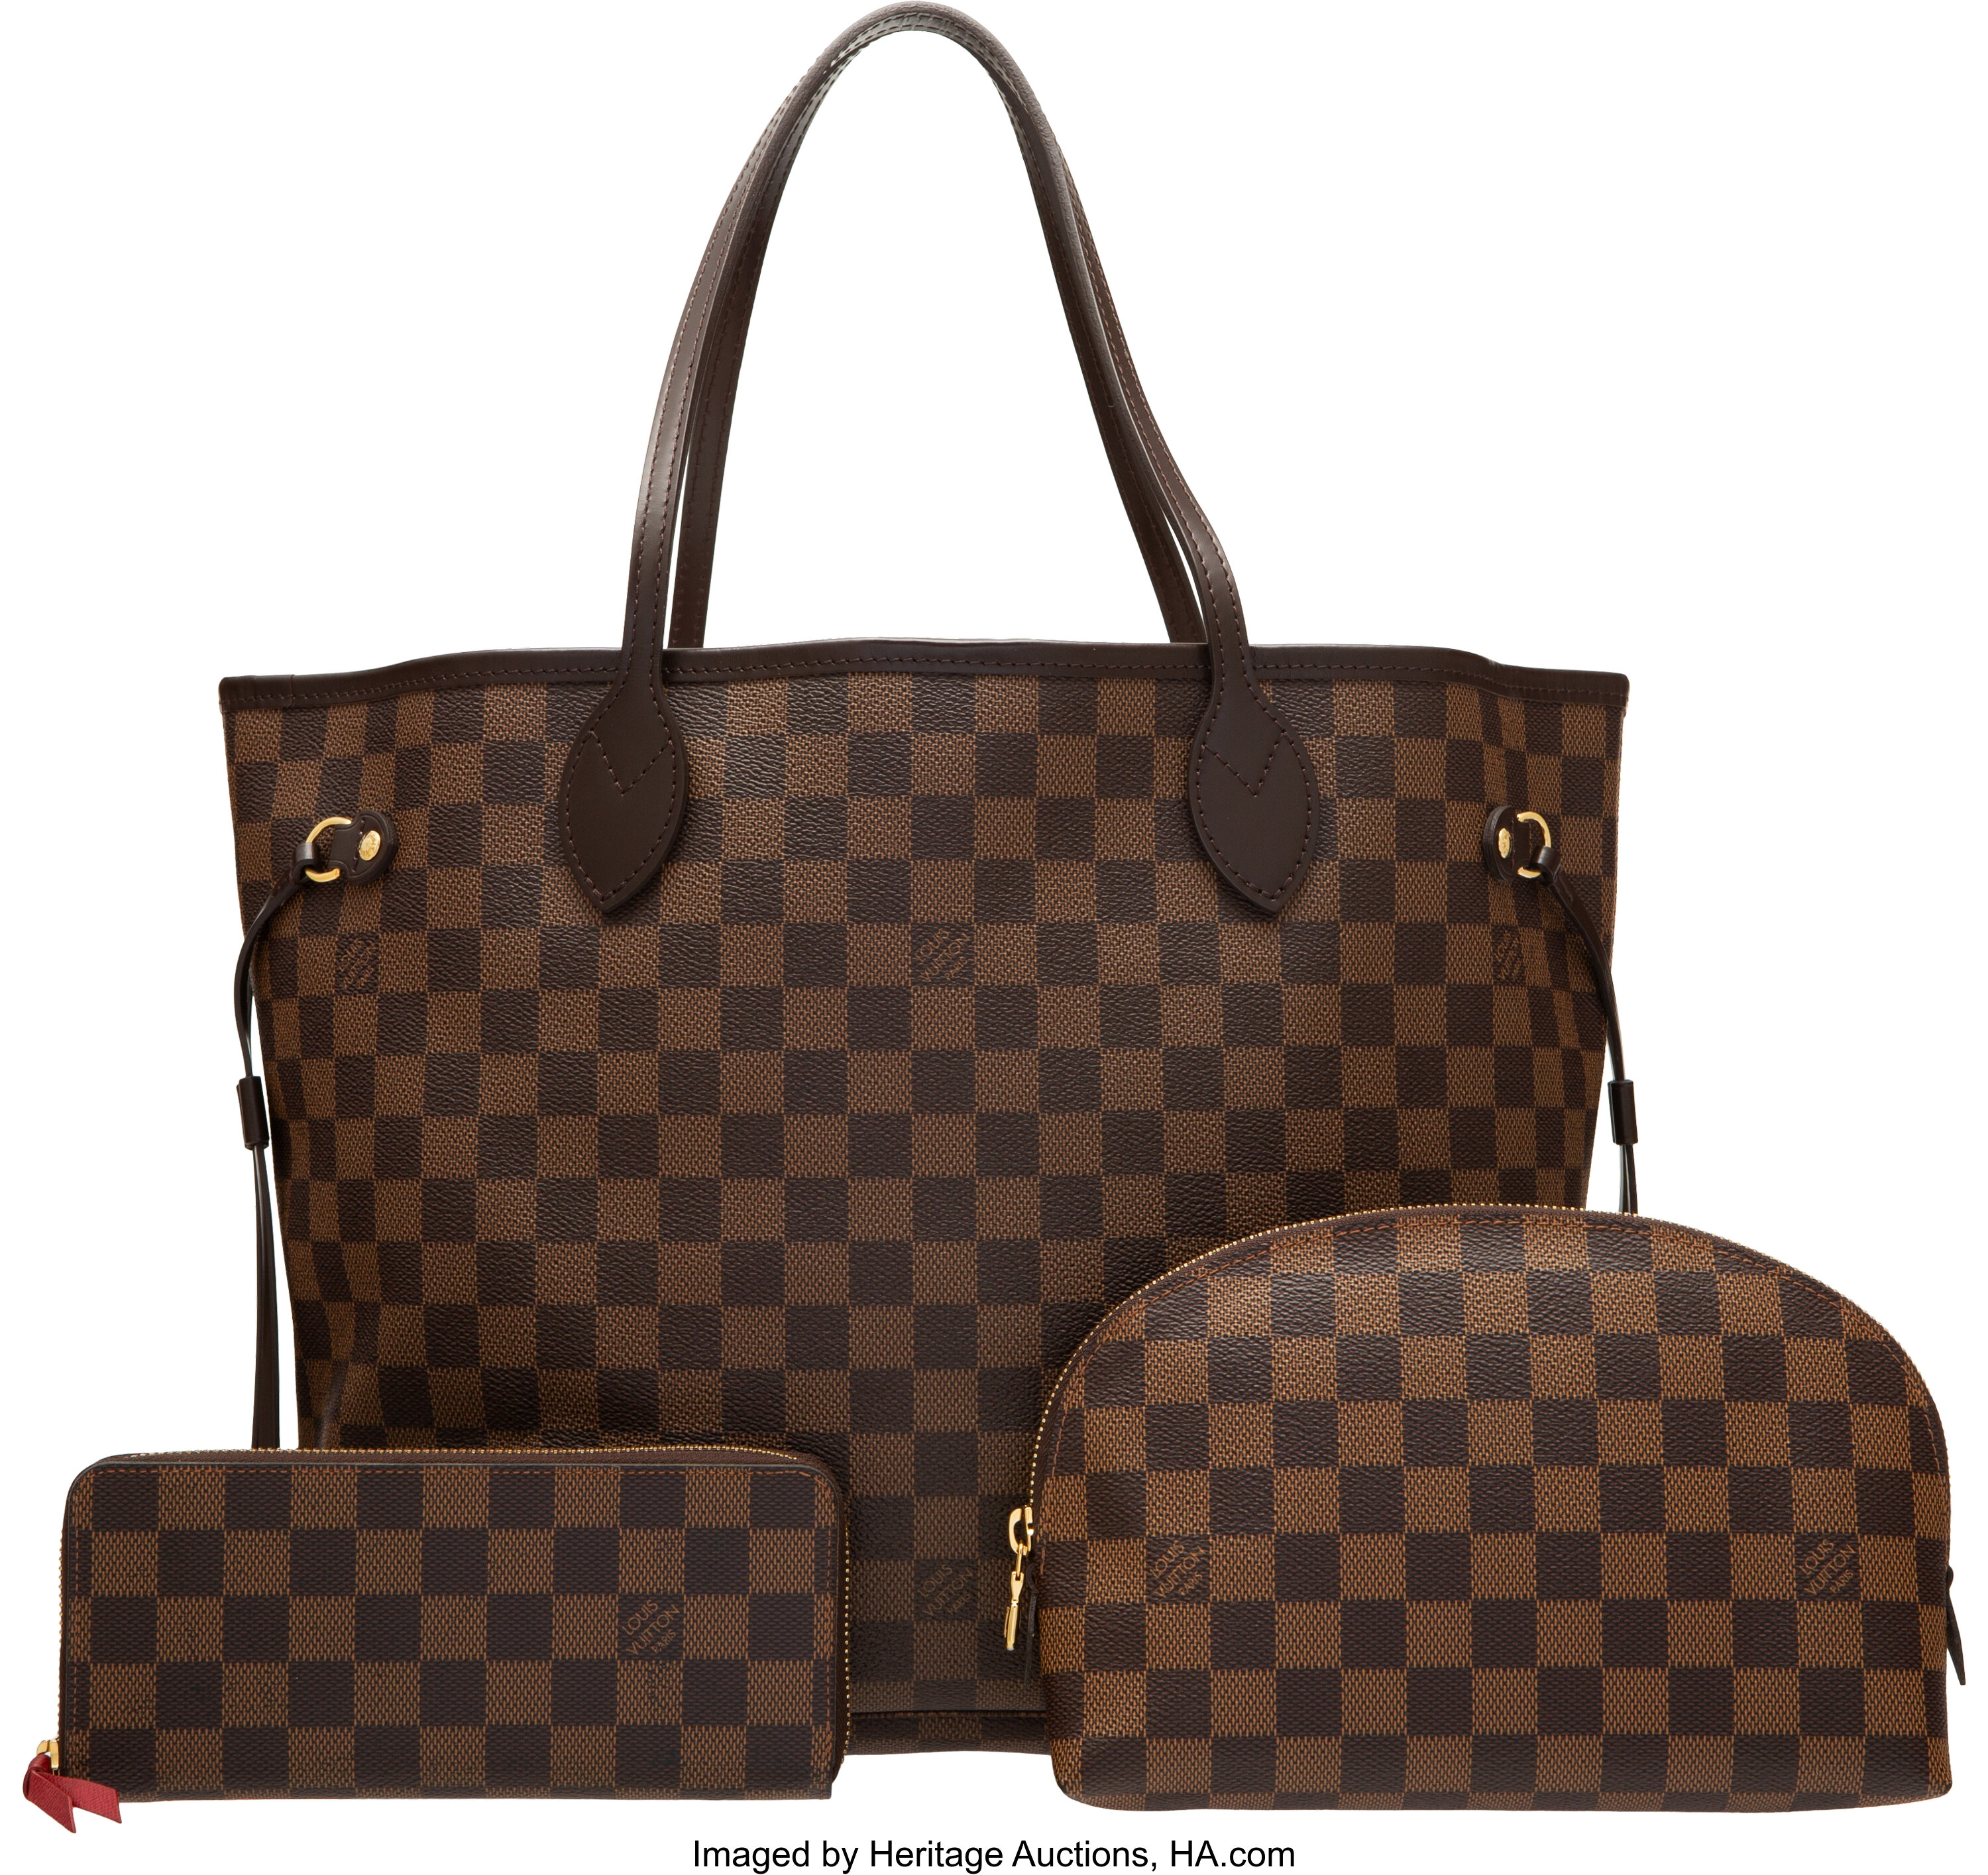 Sold at Auction: Louis Vuitton, LOUIS VUITTON NEVERFULL MM TOTE